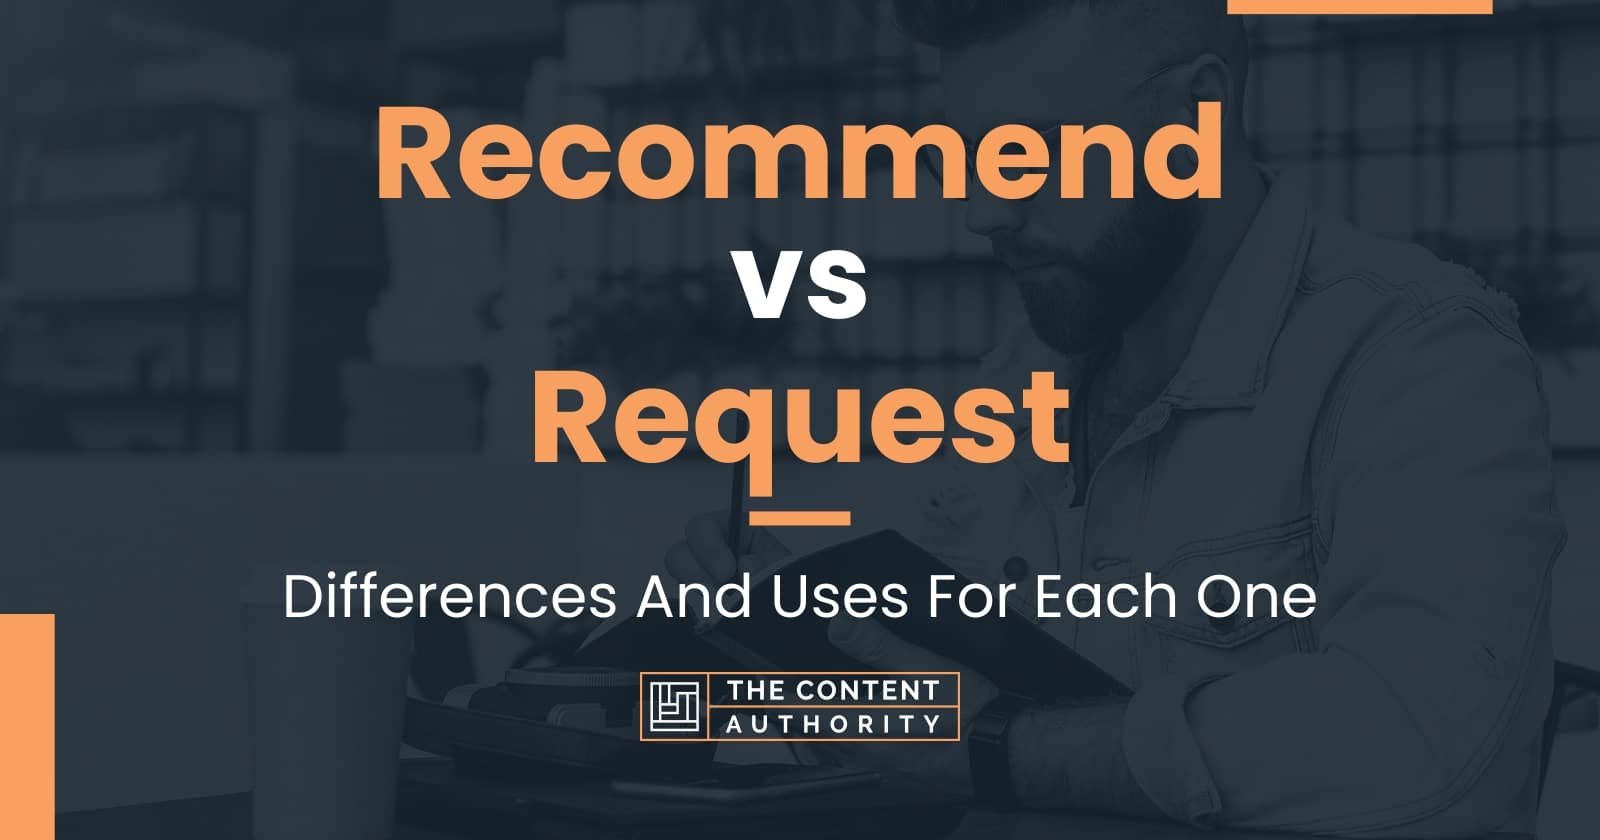 Recommend vs Request: Differences And Uses For Each One